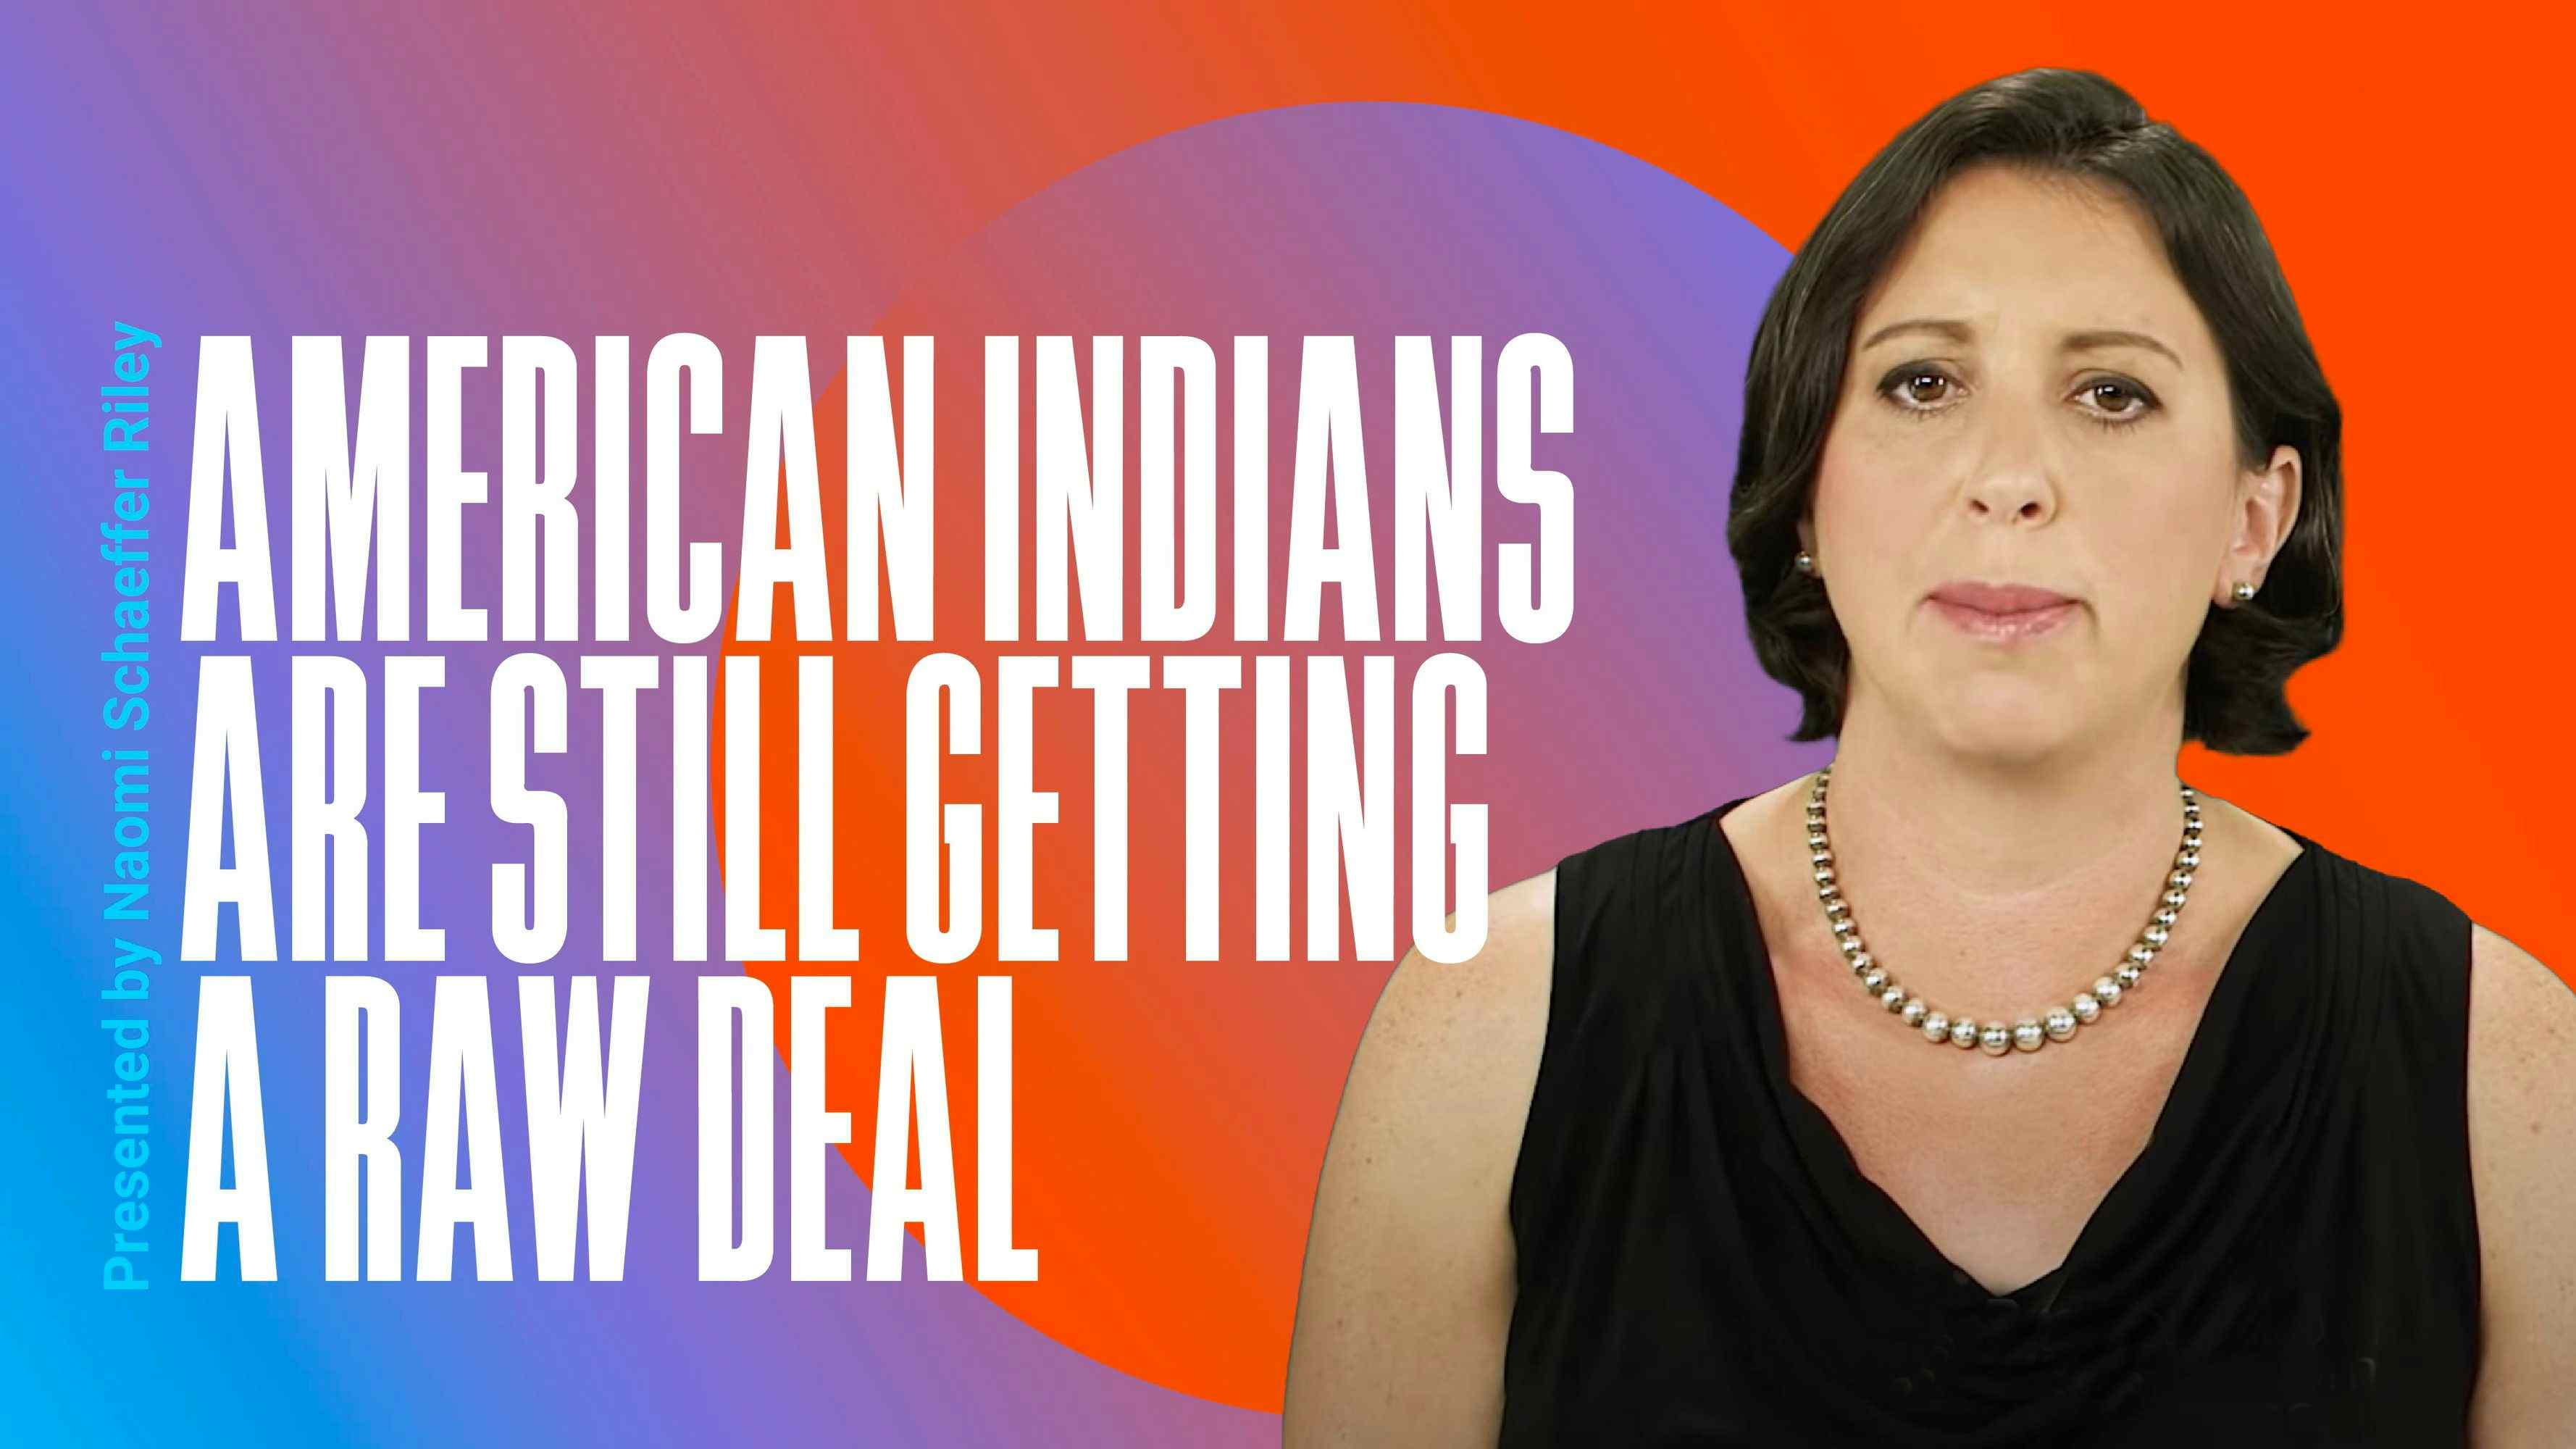 American Indians Are Still Getting a Raw Deal